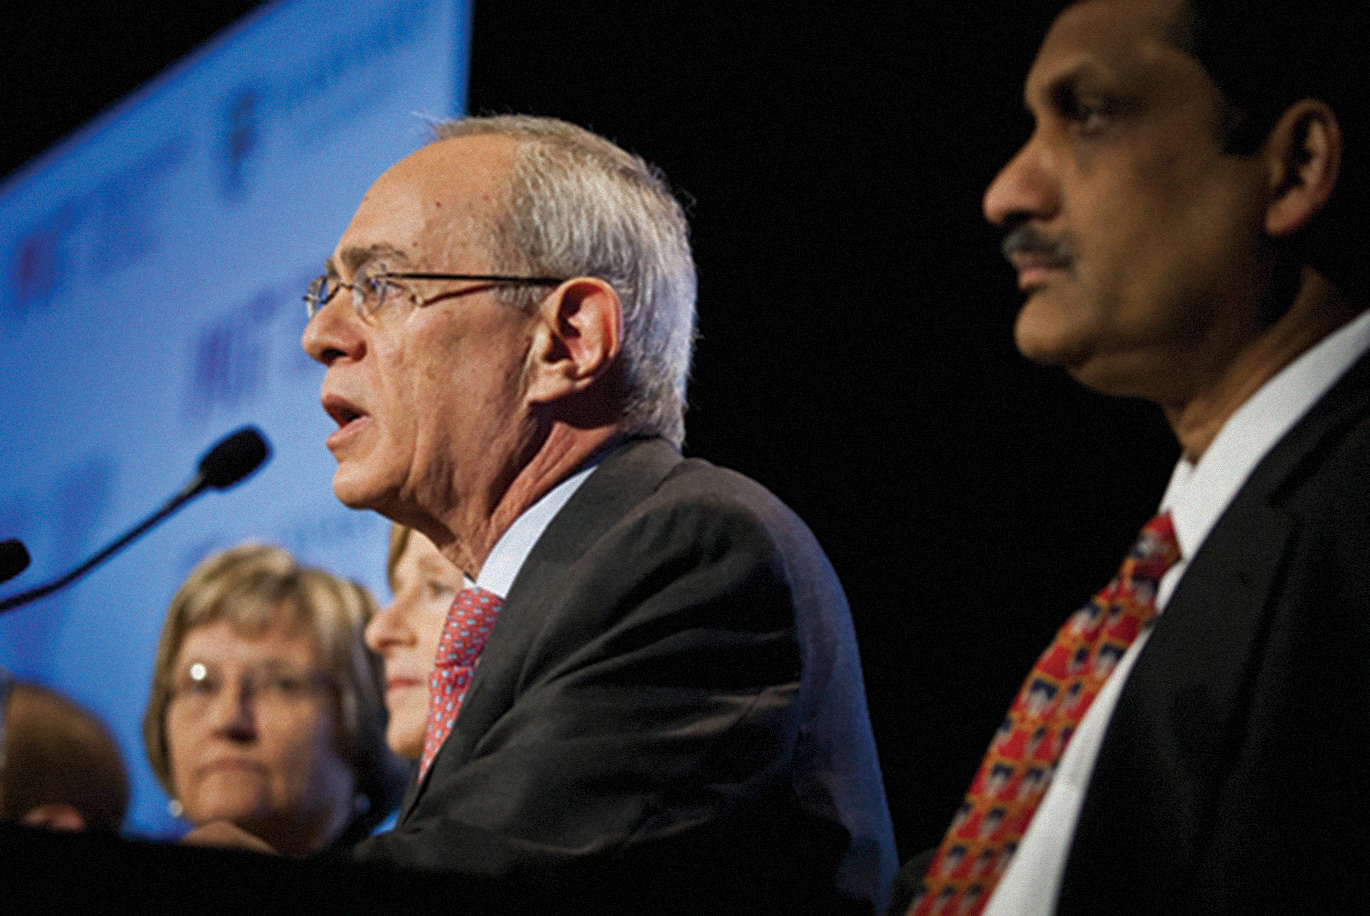 Reif speaking on stage with other panelists in frame